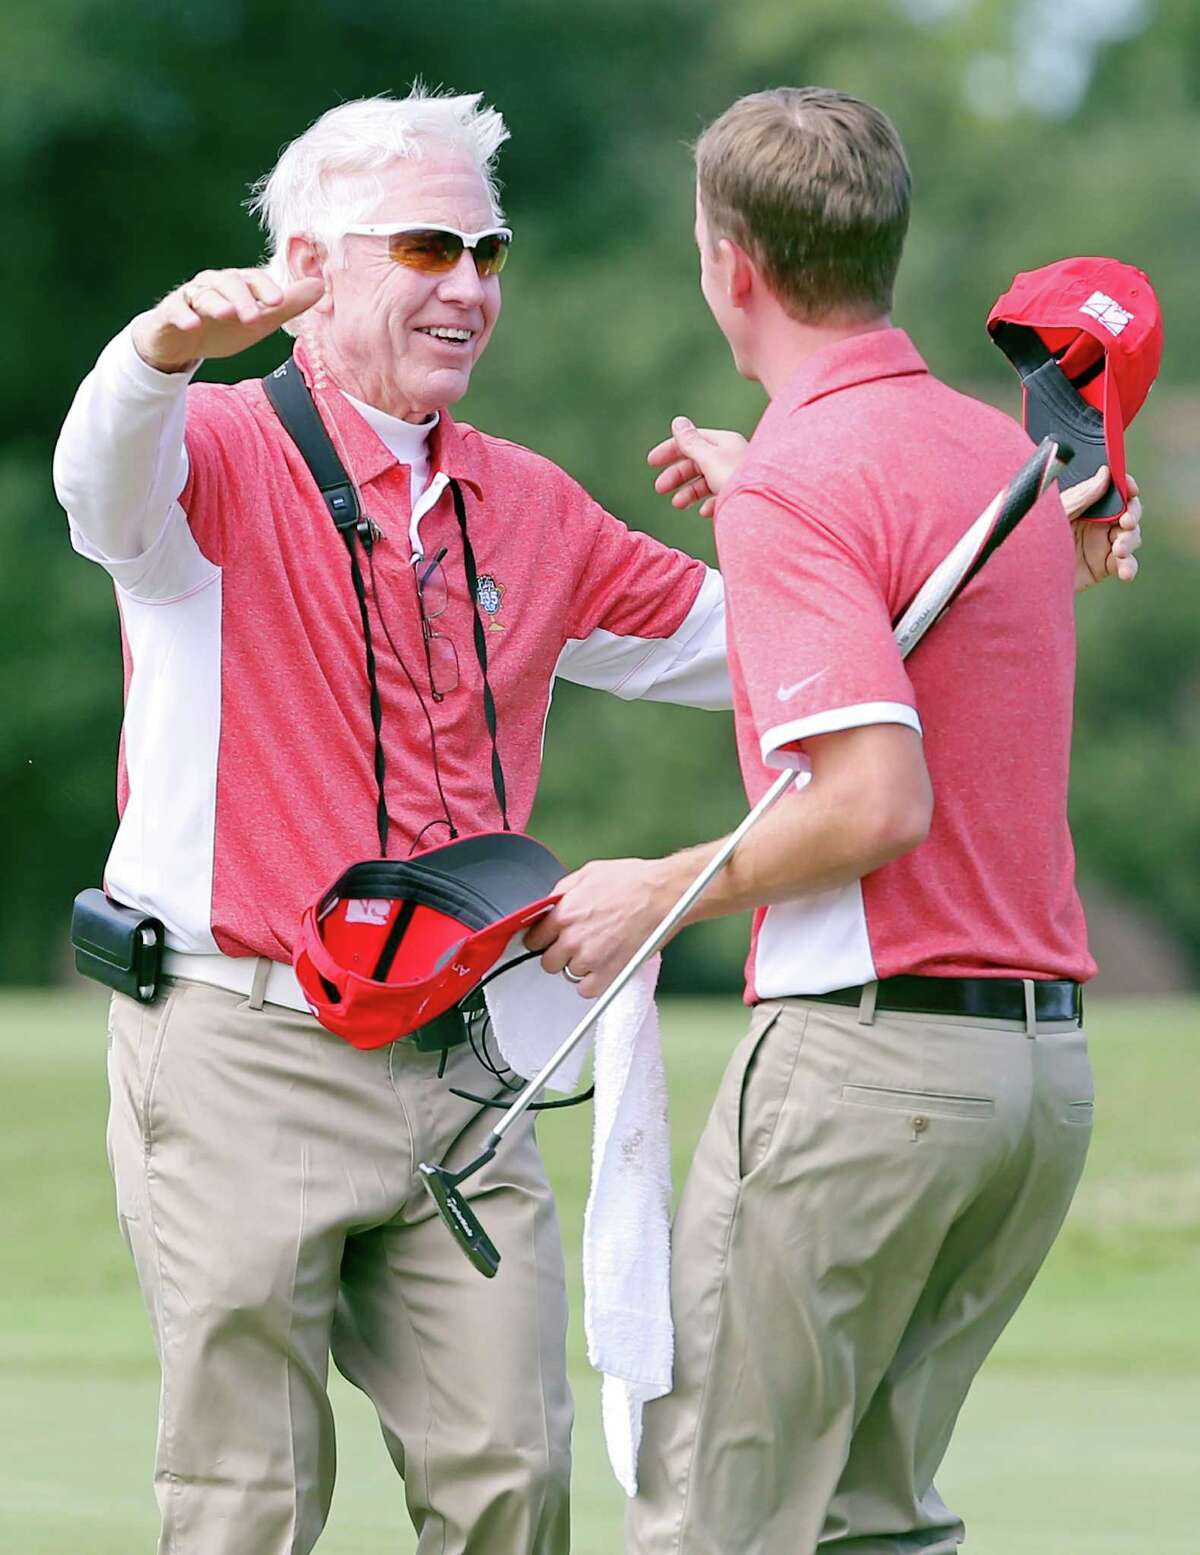 Team San Antonio captain Pat McMahan (left) celebrates with teammate Ross Wilhelm on 17, after Wilhelm made his putt during the Rudy’s I-35 Cup at Fair Oaks Ranch Golf & Country Club.